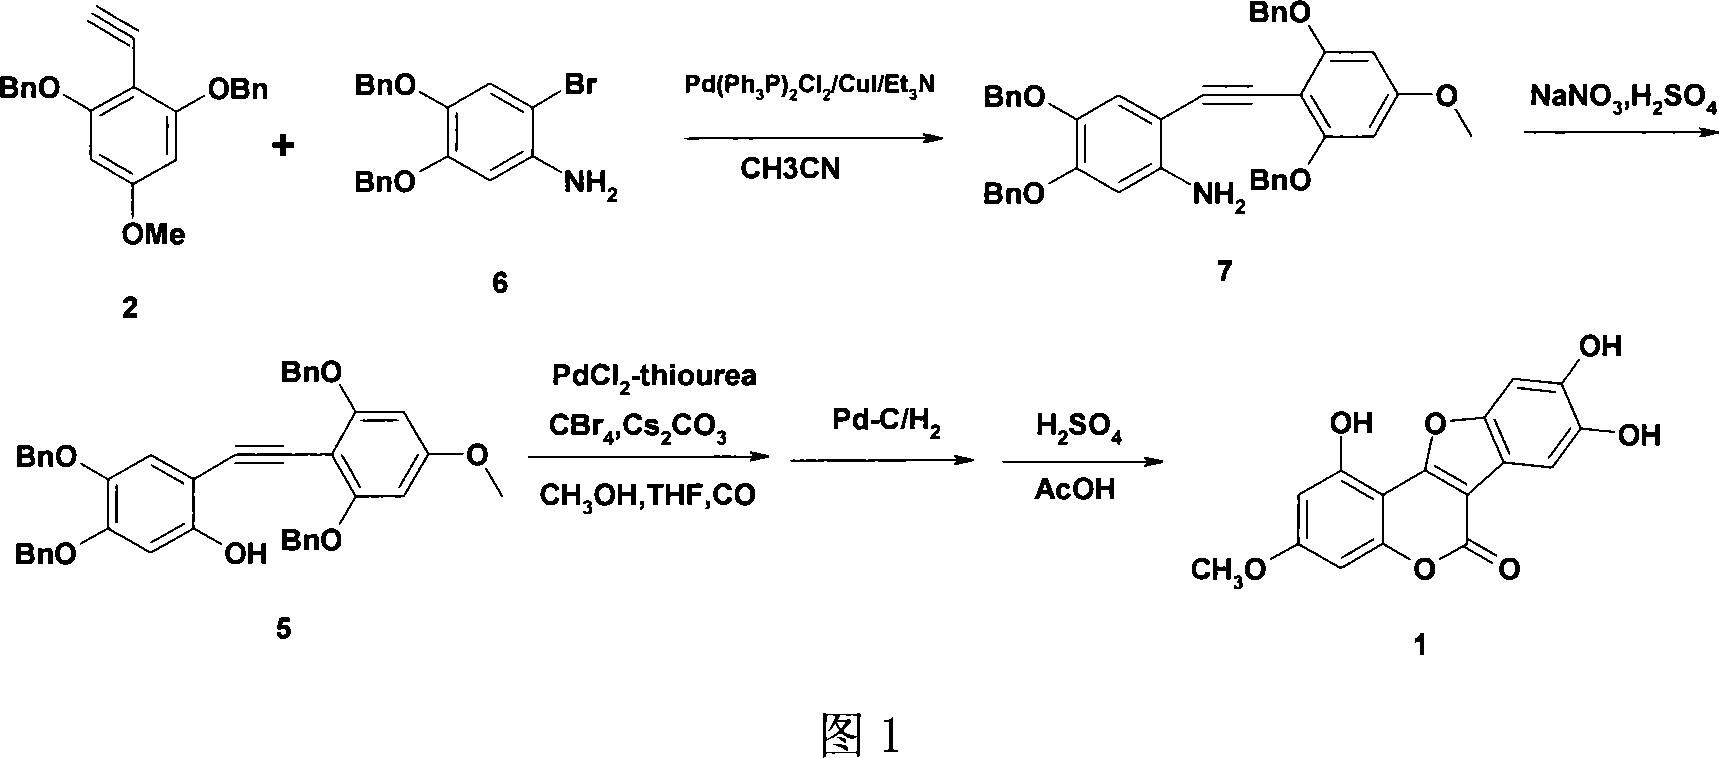 Chemical total synthesis method for wedelolactone